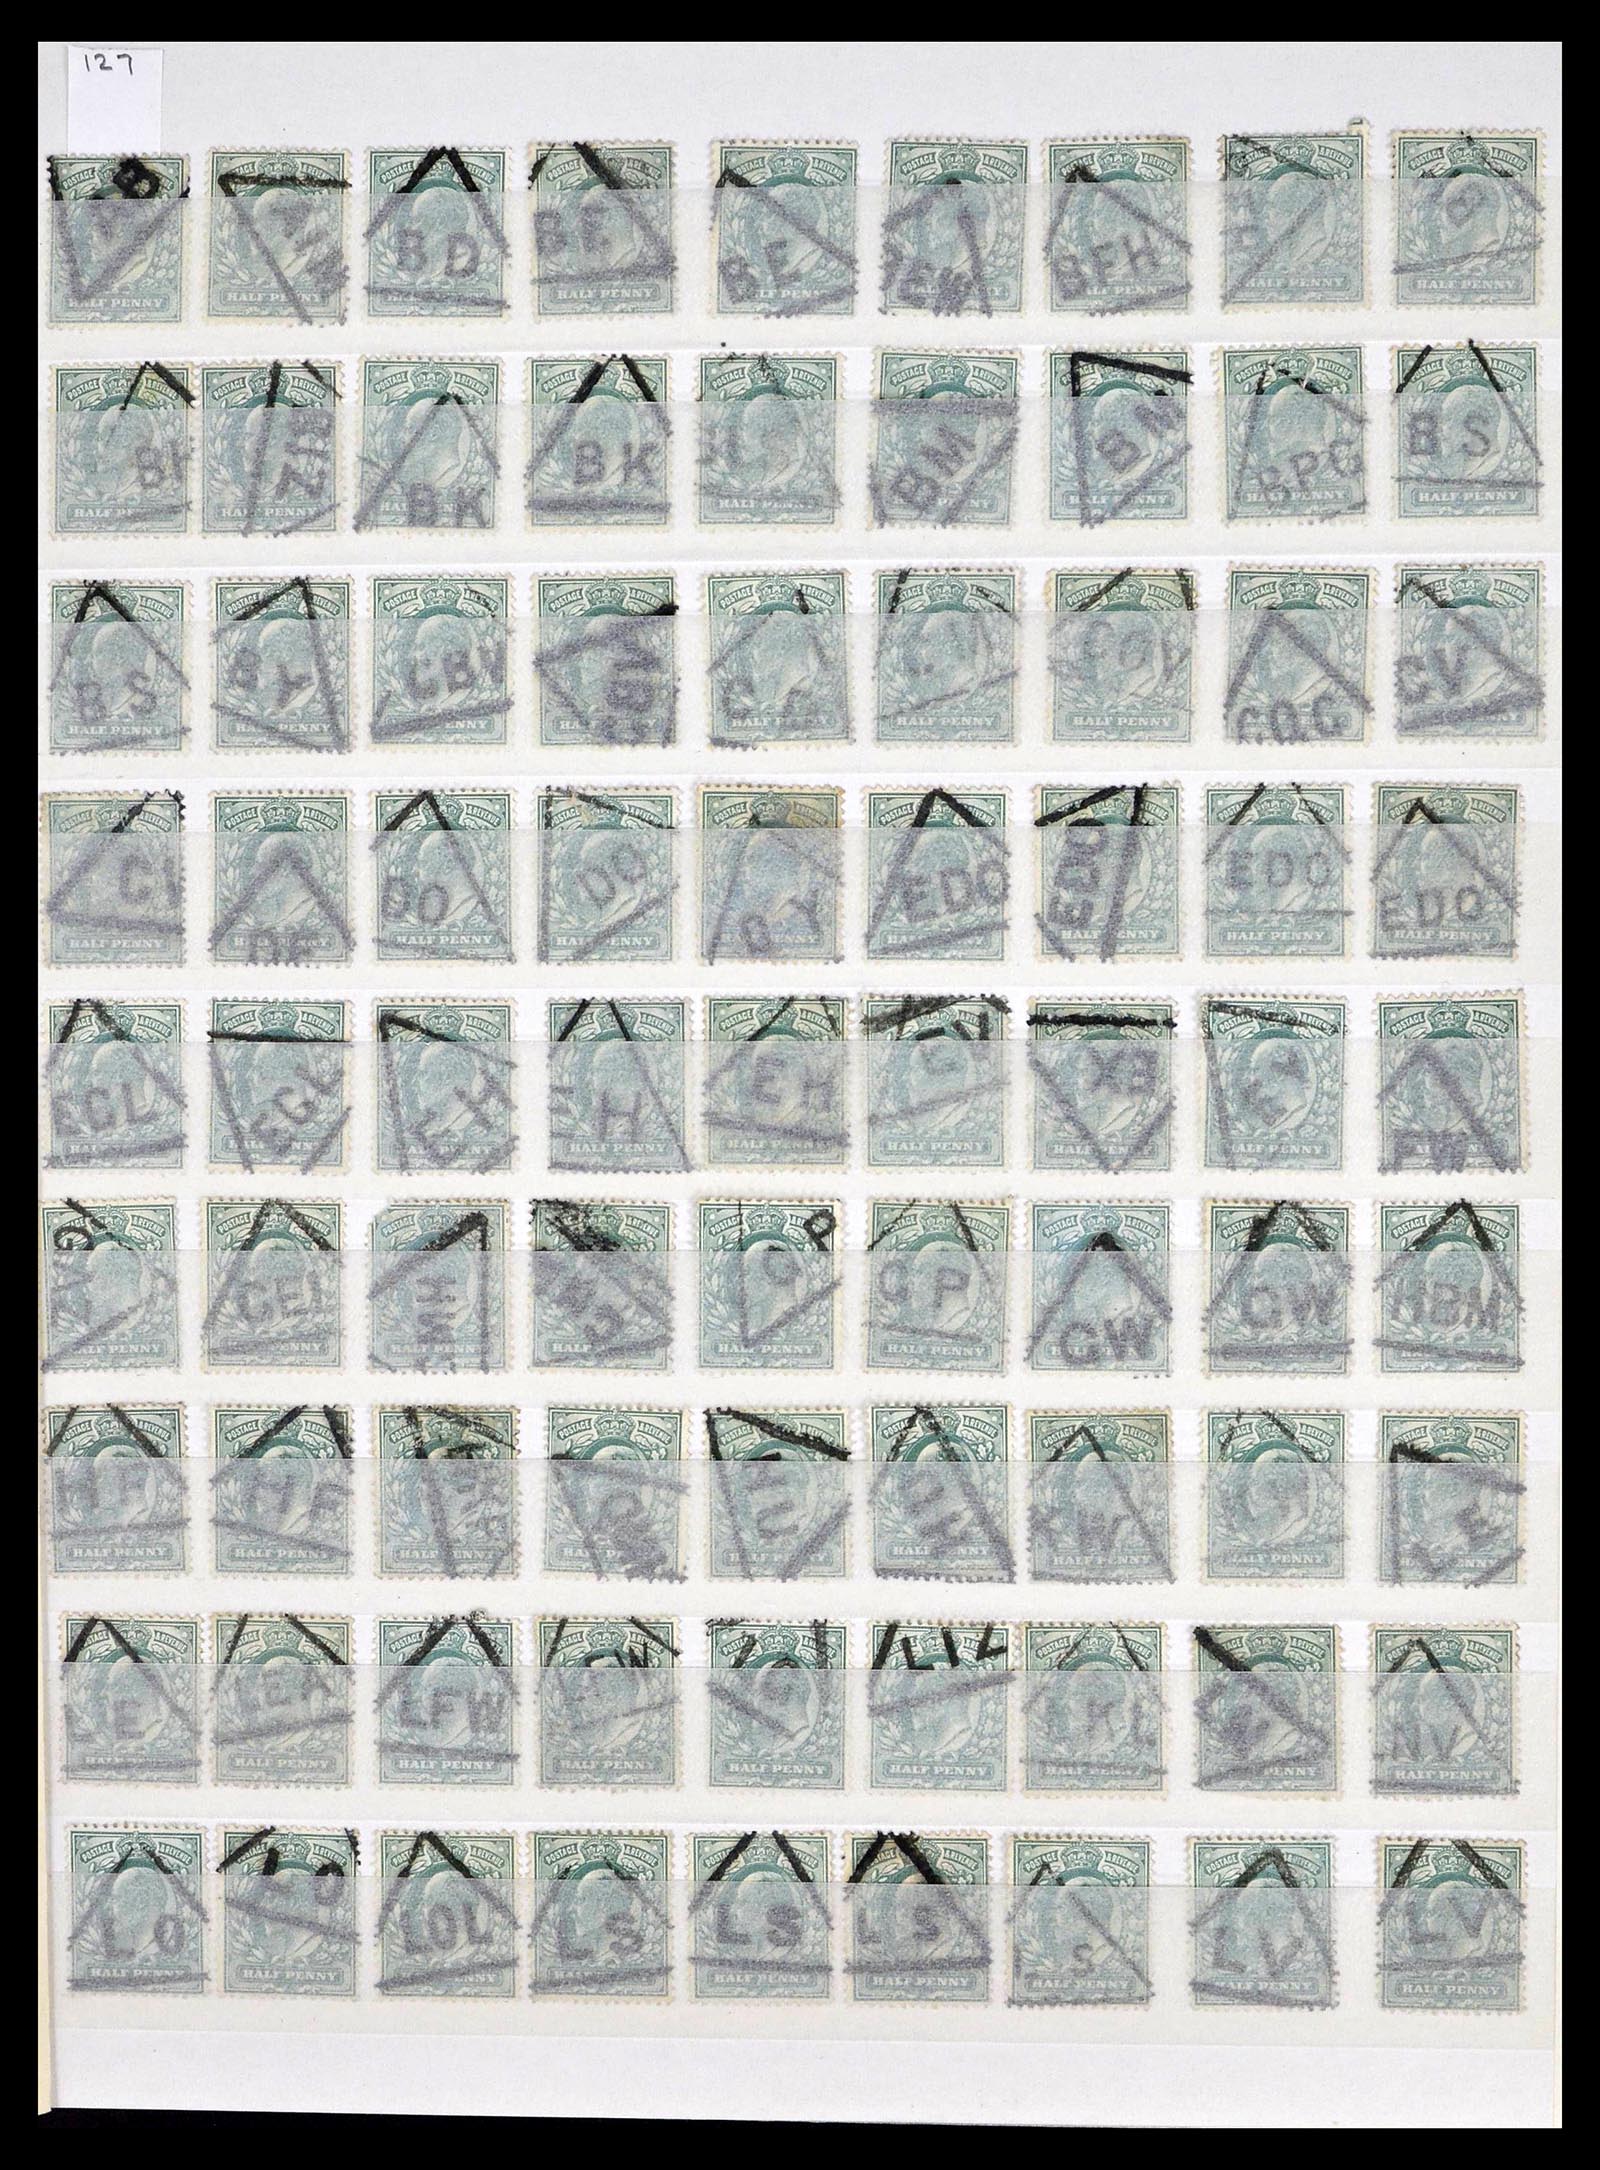 39196 0097 - Stamp collection 39196 Great Britain 1844-1955.